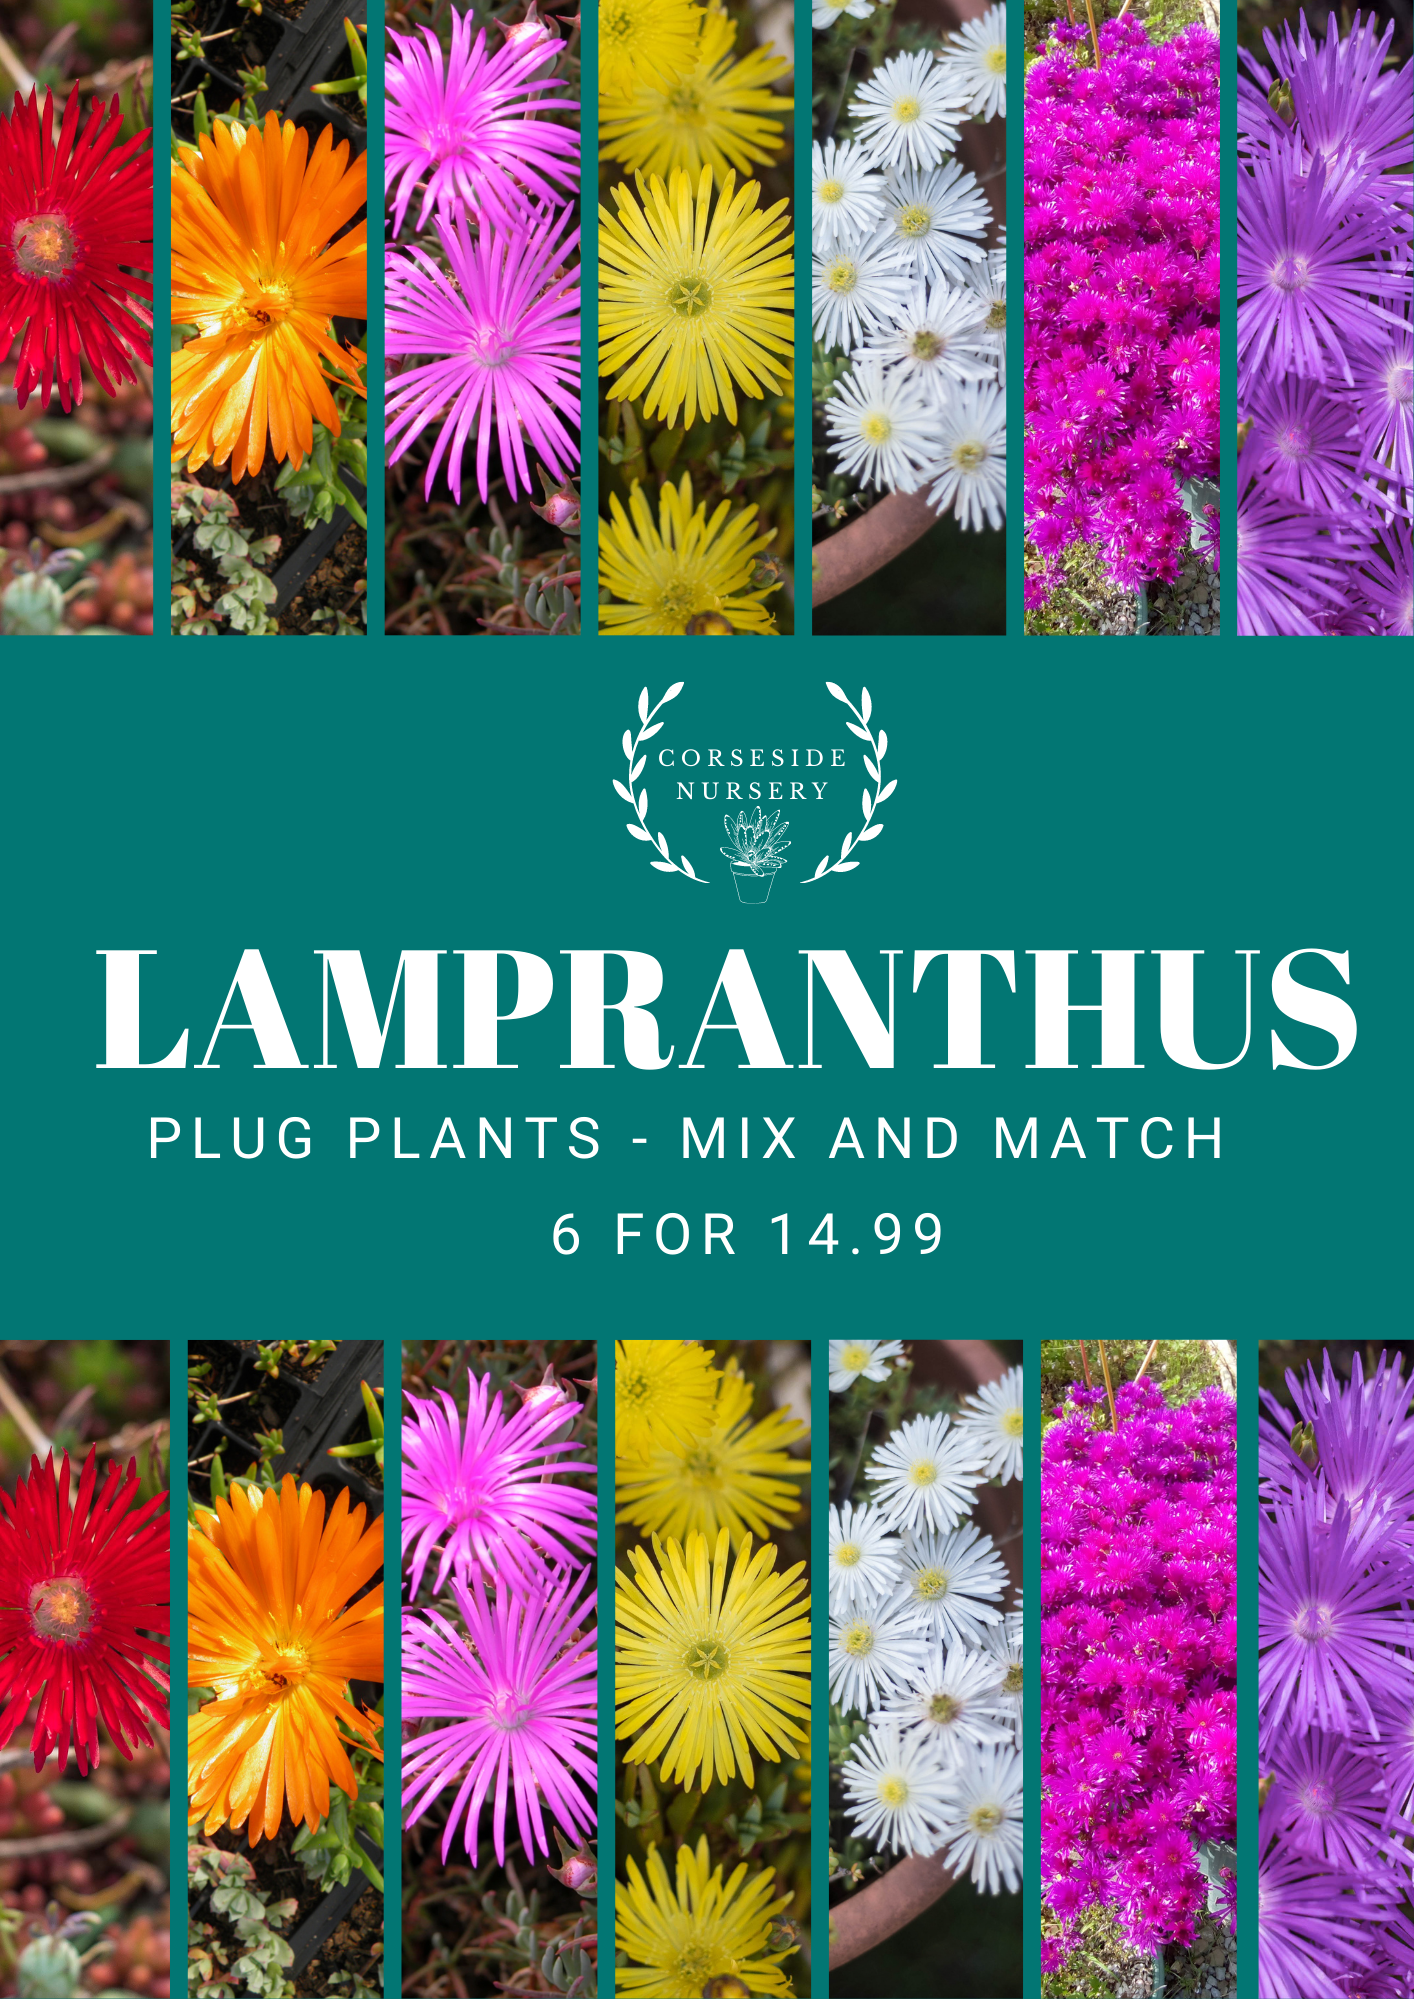 Lampranthus Ice Plant Well Rooted Plugs Free Uk Delivery Mix Match Colours Corseside Nursery Pembrokeshire Buy Succulents Online Uk Plants By Post Peat Free Delivery Organic Aeonium Echeveria Aloe Crassula